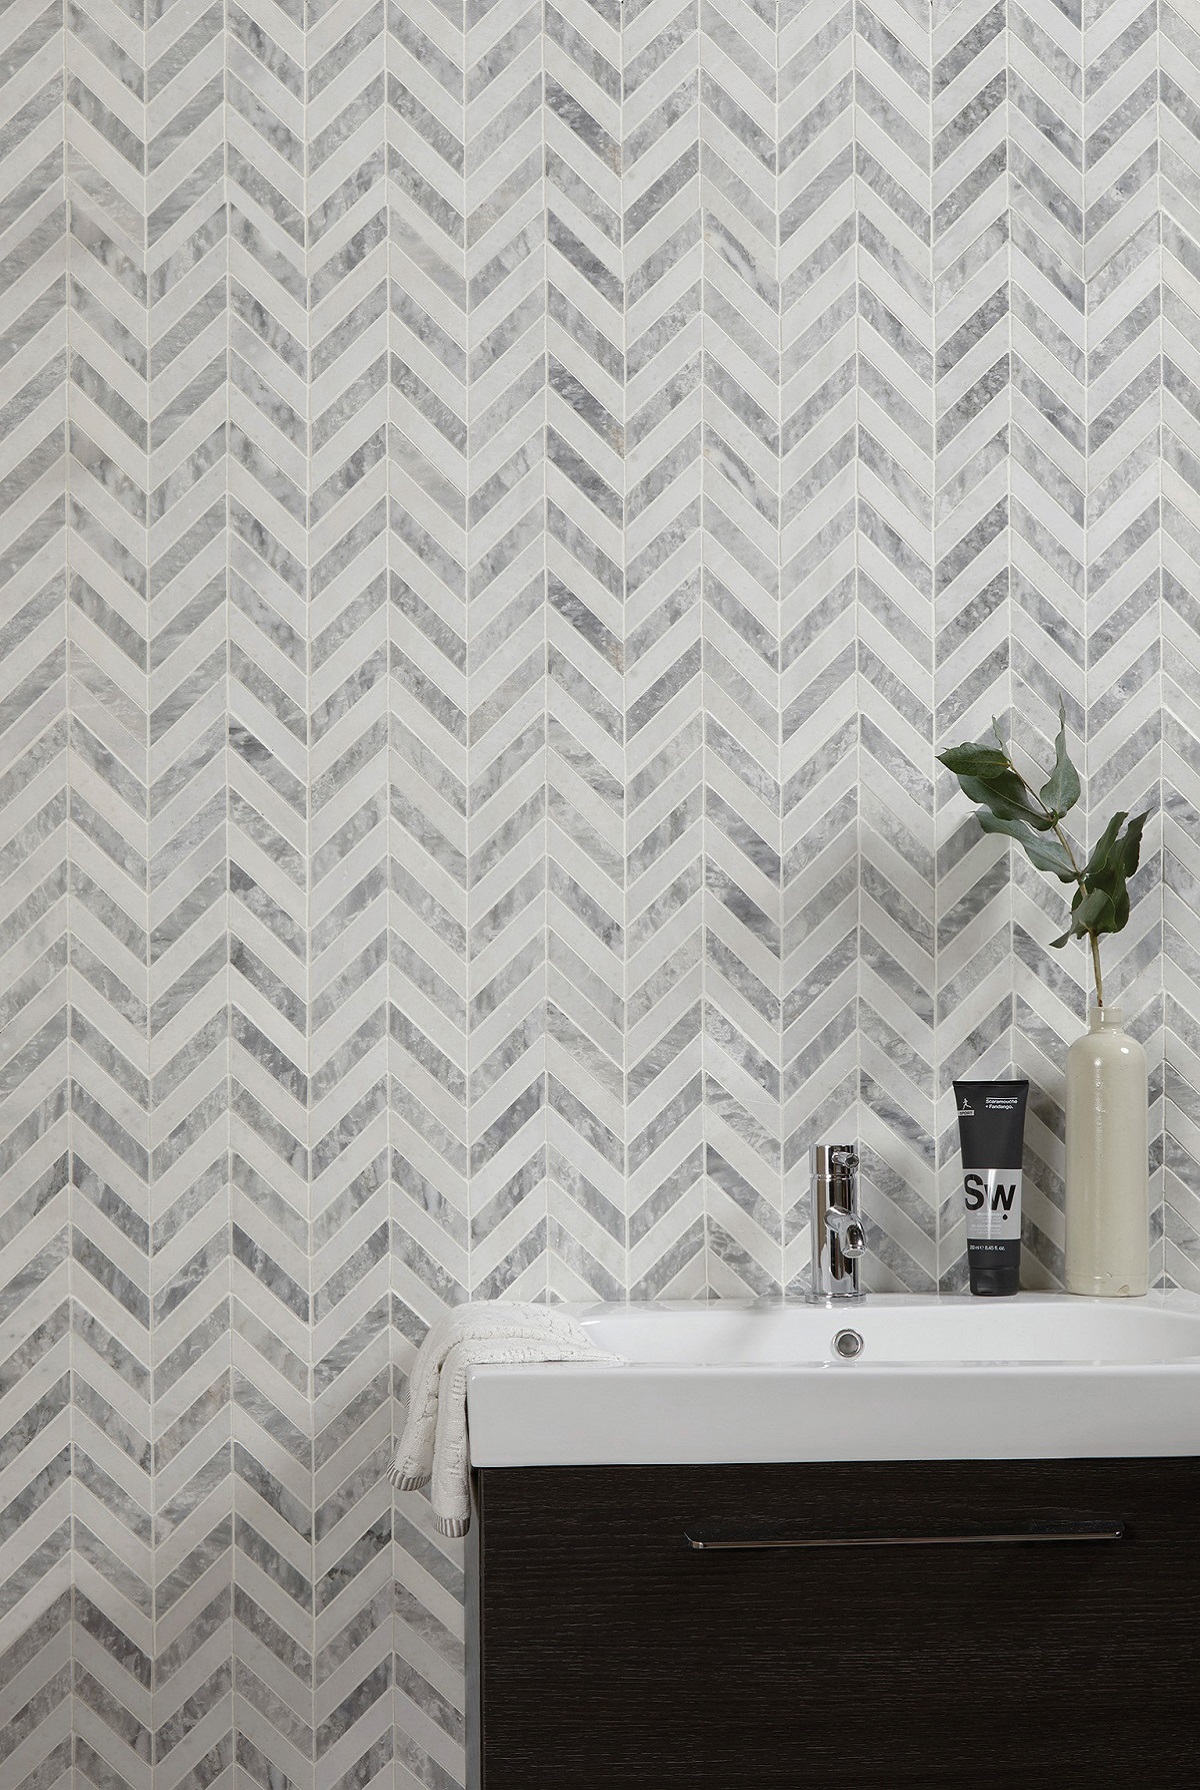 bathroom vanity with small chevron marble tile design behind on the wall